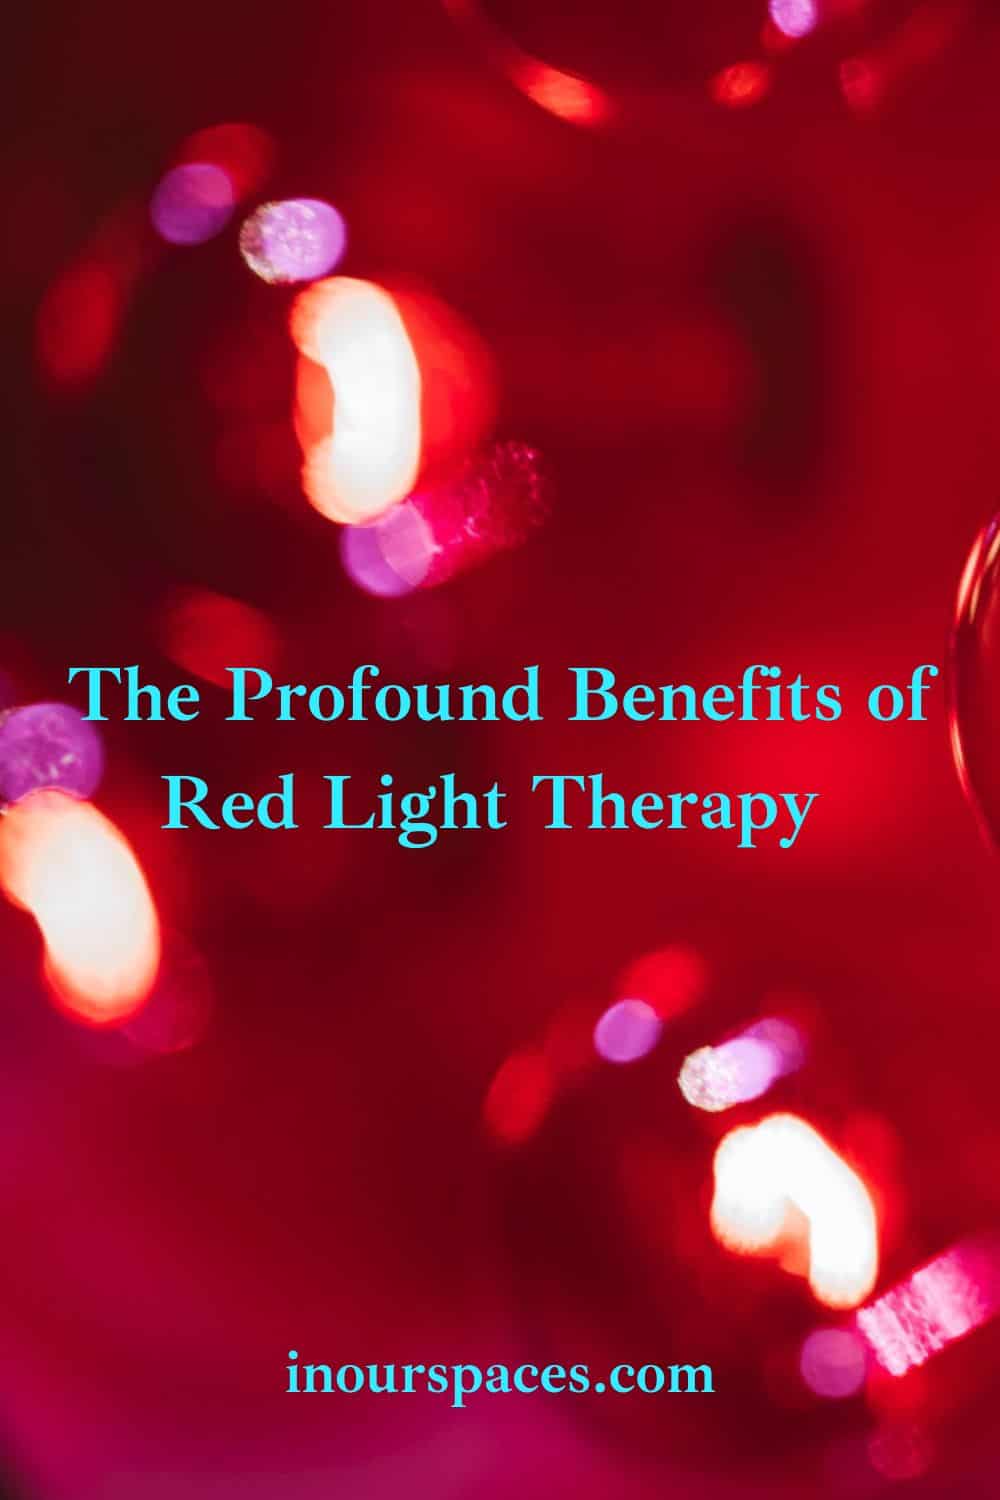 image with text of blurry photo of red light bulbs emitting red glow. Text reads "The Profound benefits of red light therapy, in our spaces dot com